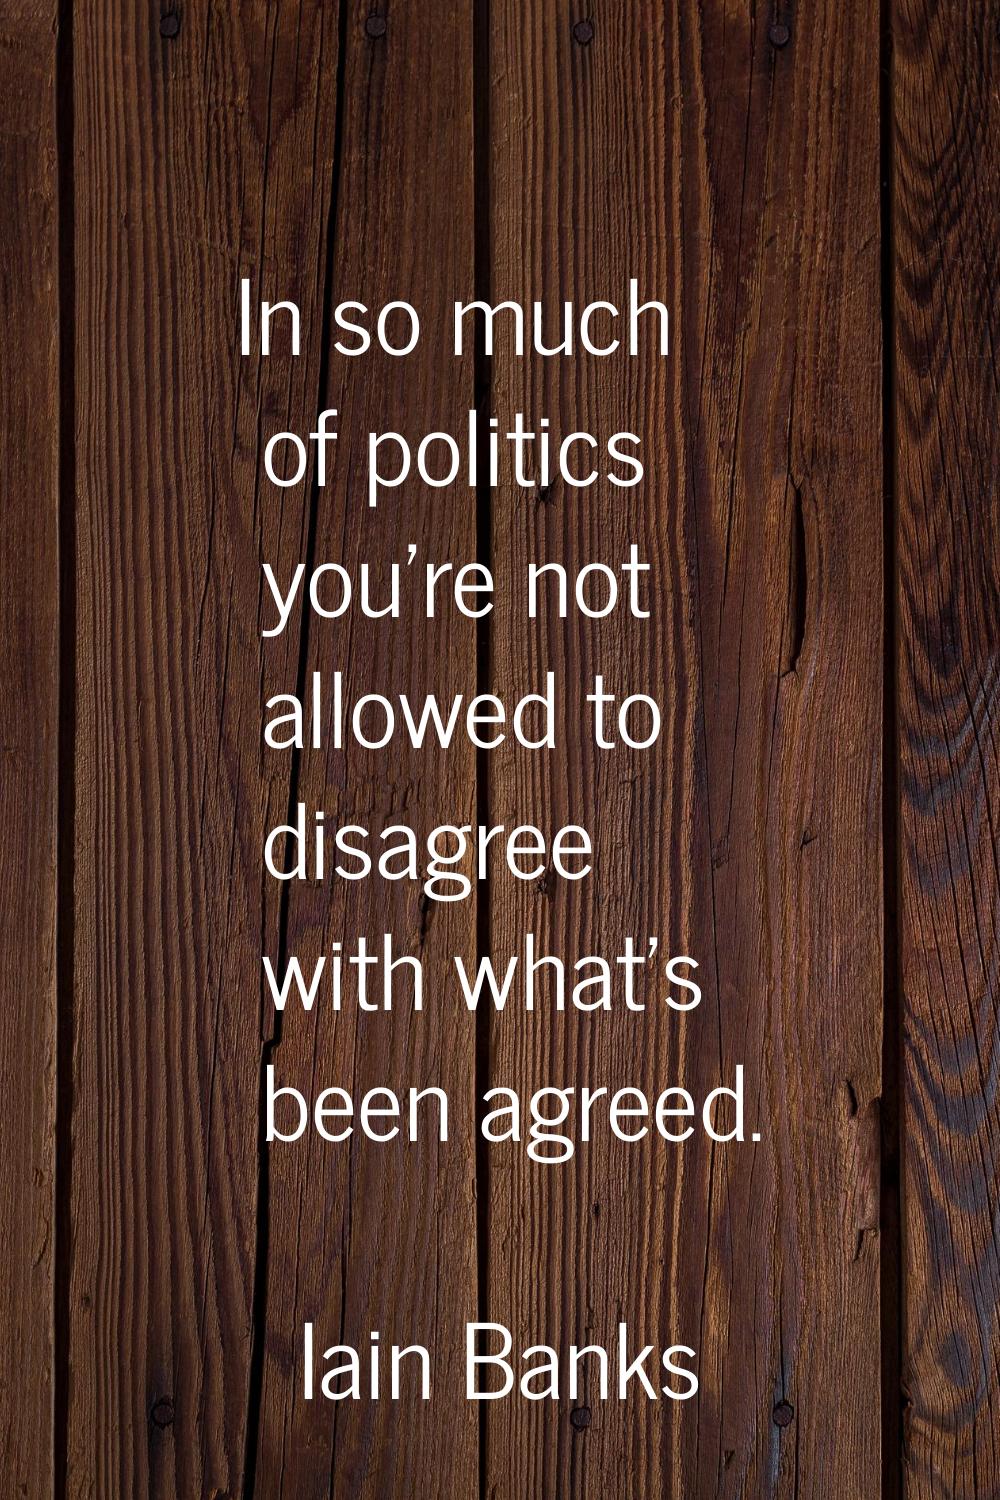 In so much of politics you're not allowed to disagree with what's been agreed.